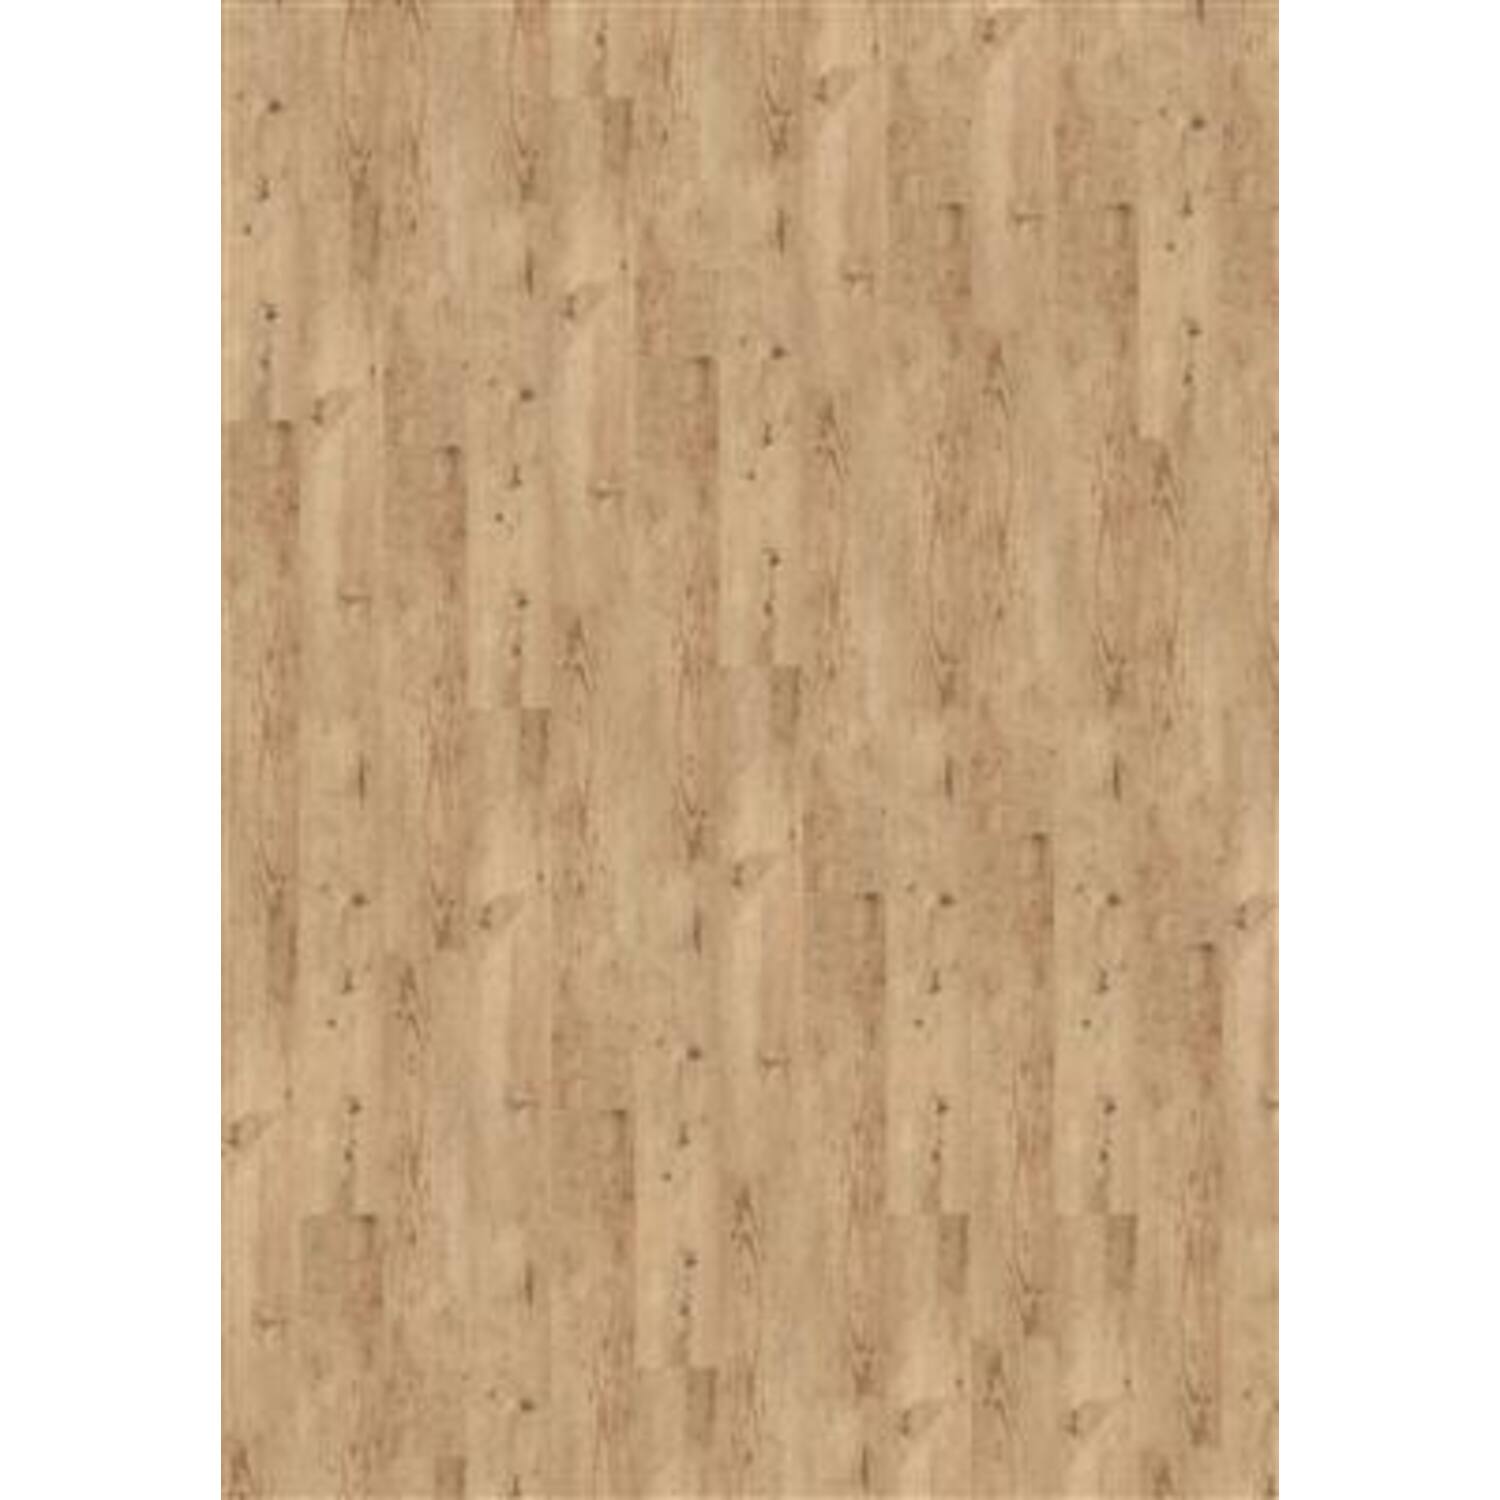 EXPONA Commercial Blond 4017 Blond Country Oak